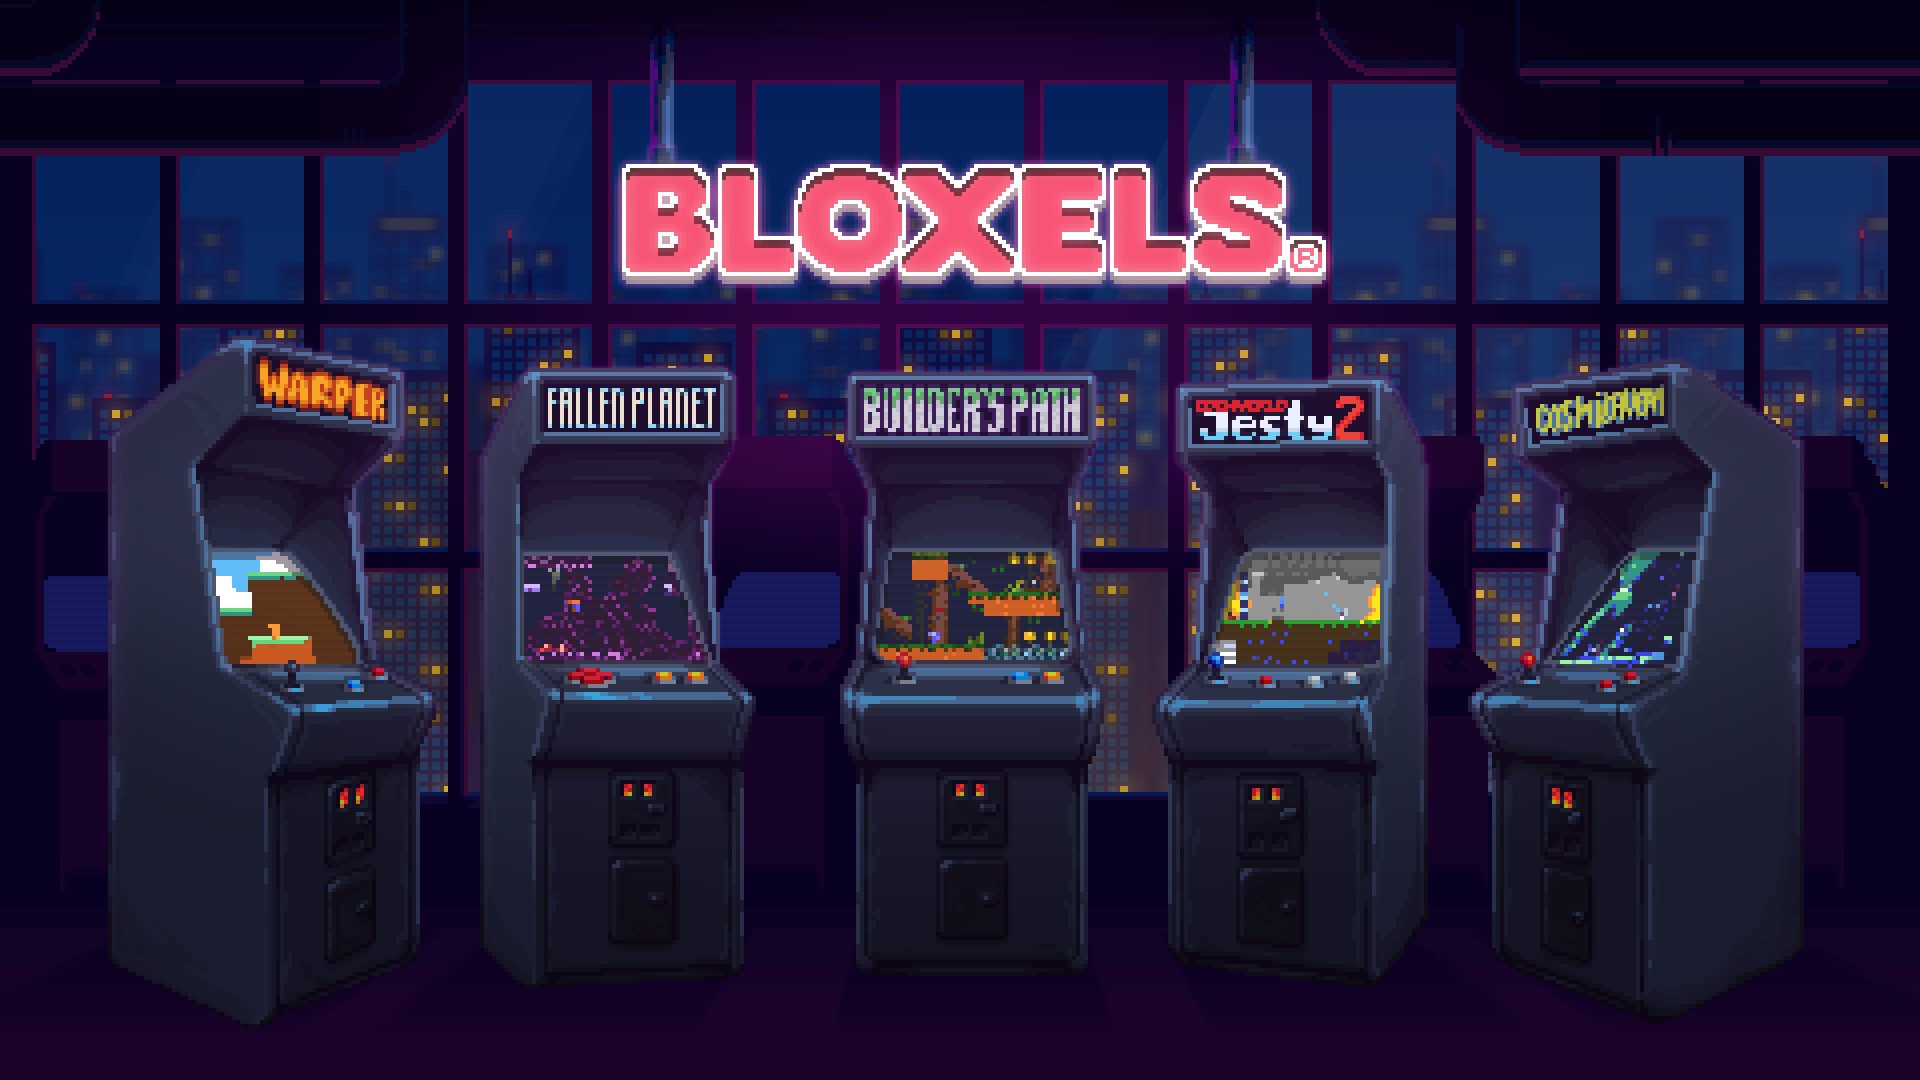 Google built an online HTML5 game inspired by the classic arcade